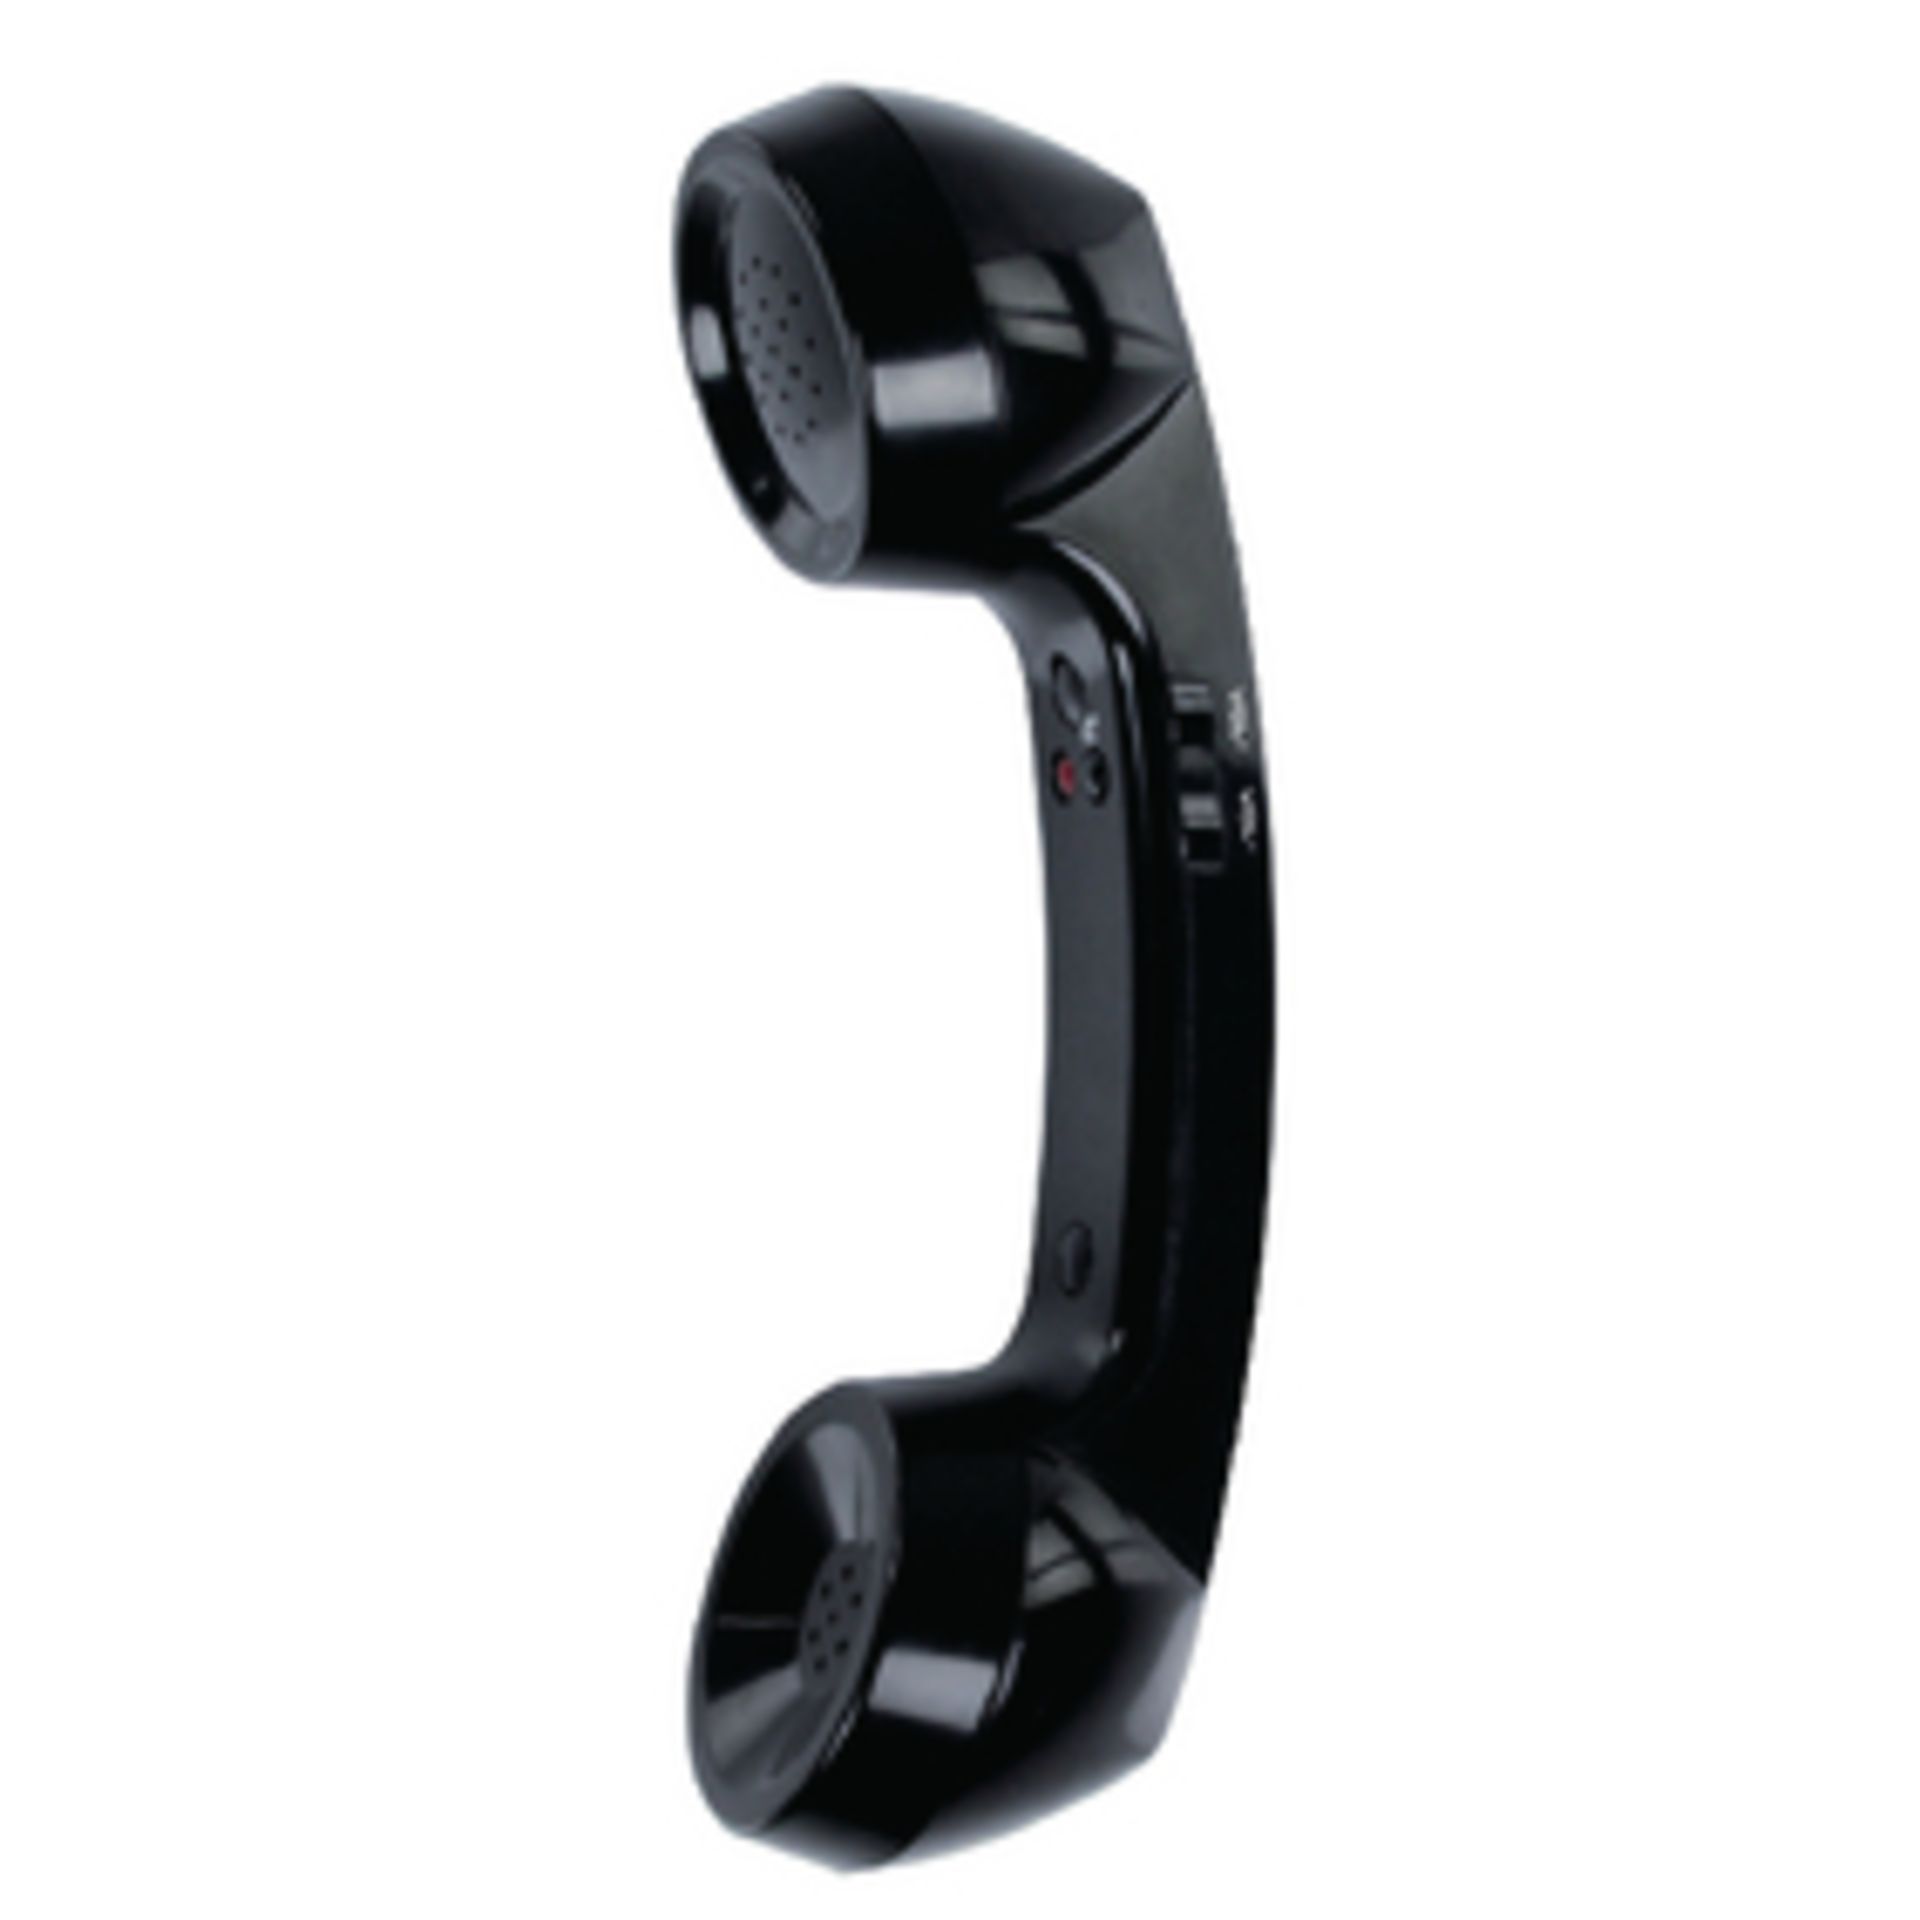 V *TRADE QTY* Brand New Bluetooth Retro Telephone Handset with Charging Cable RRP 19.99 X 10 YOUR